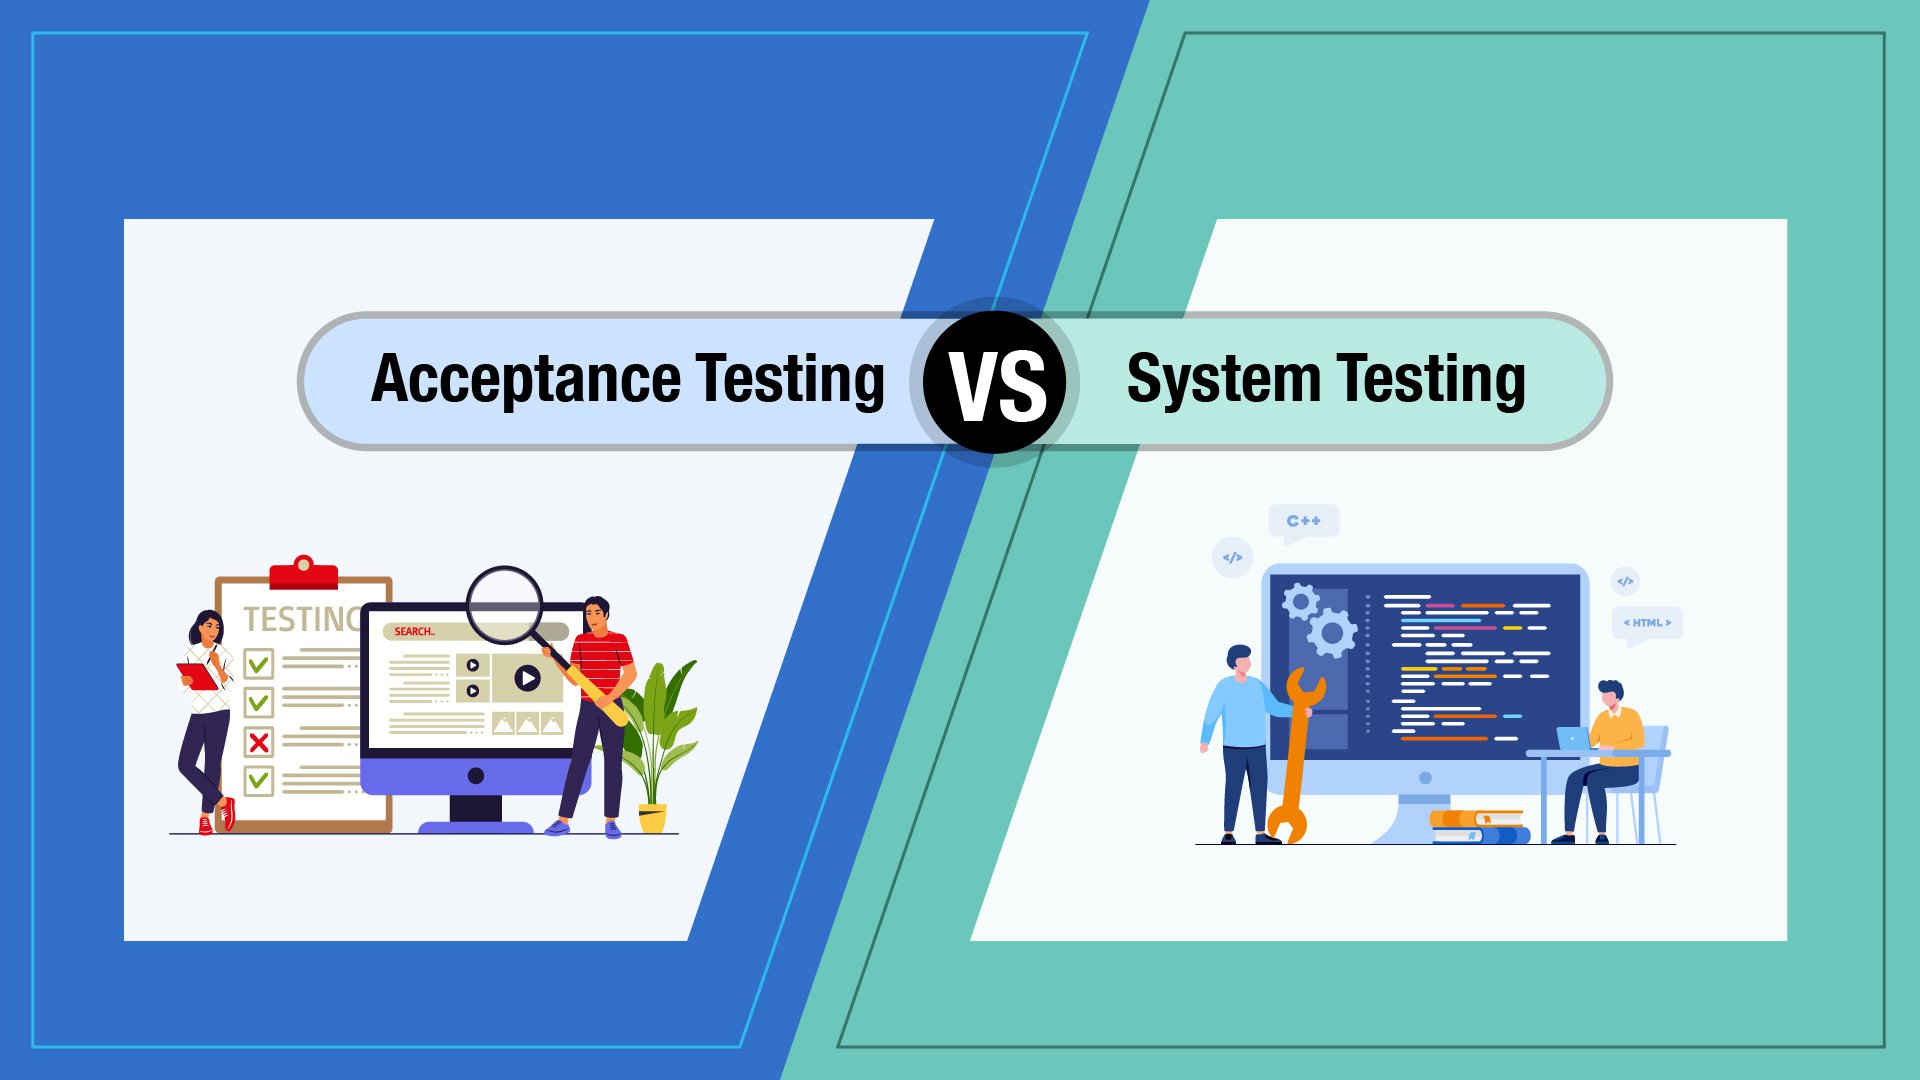 Acceptance Testing vs System Testing: Why do we need them?